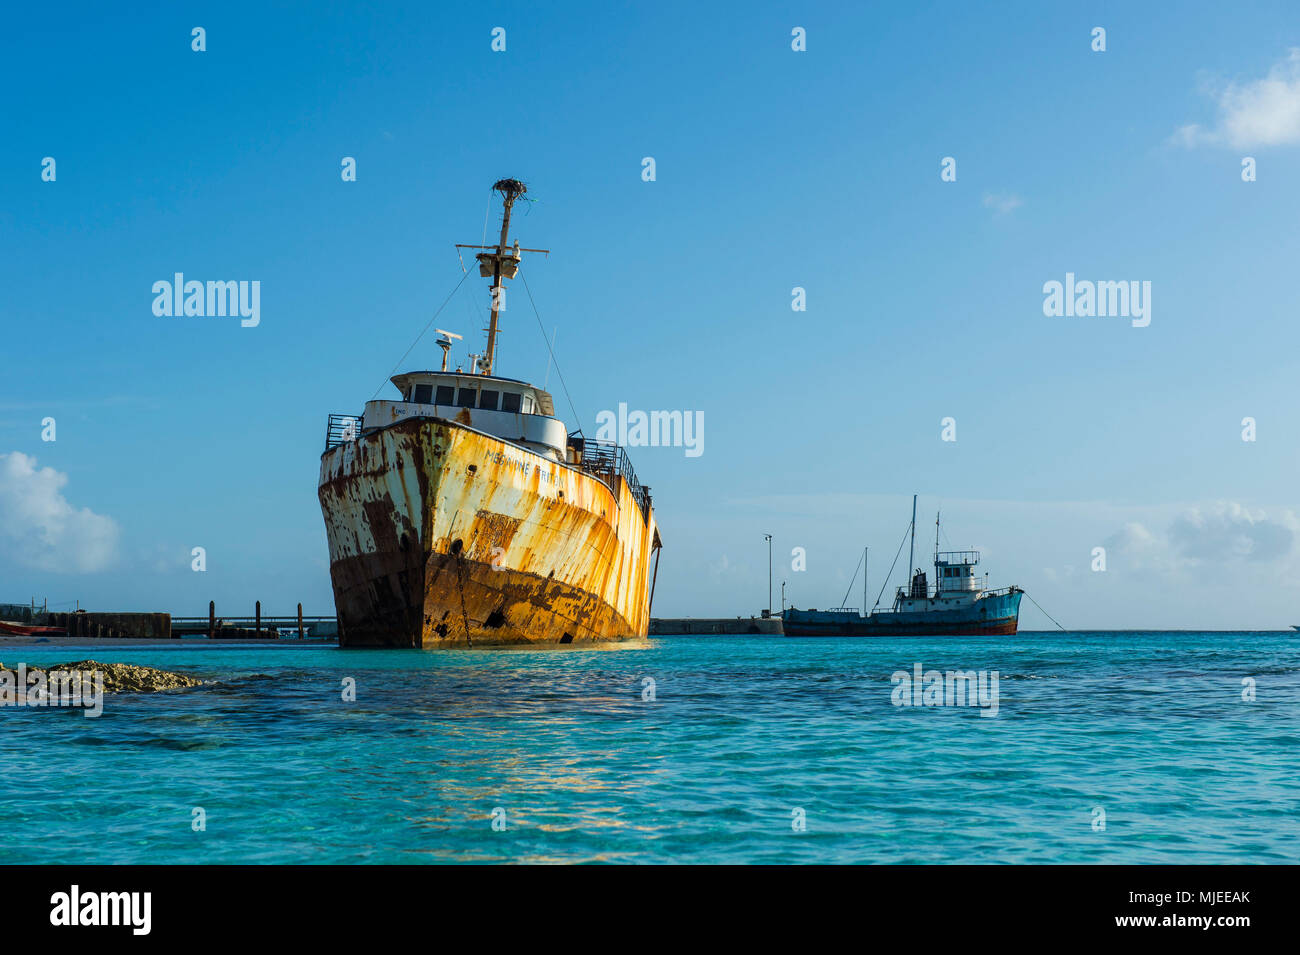 Shipwreck on the beautiful Norman Saunders beach, Grand Turk, Turks and Caicos Stock Photo